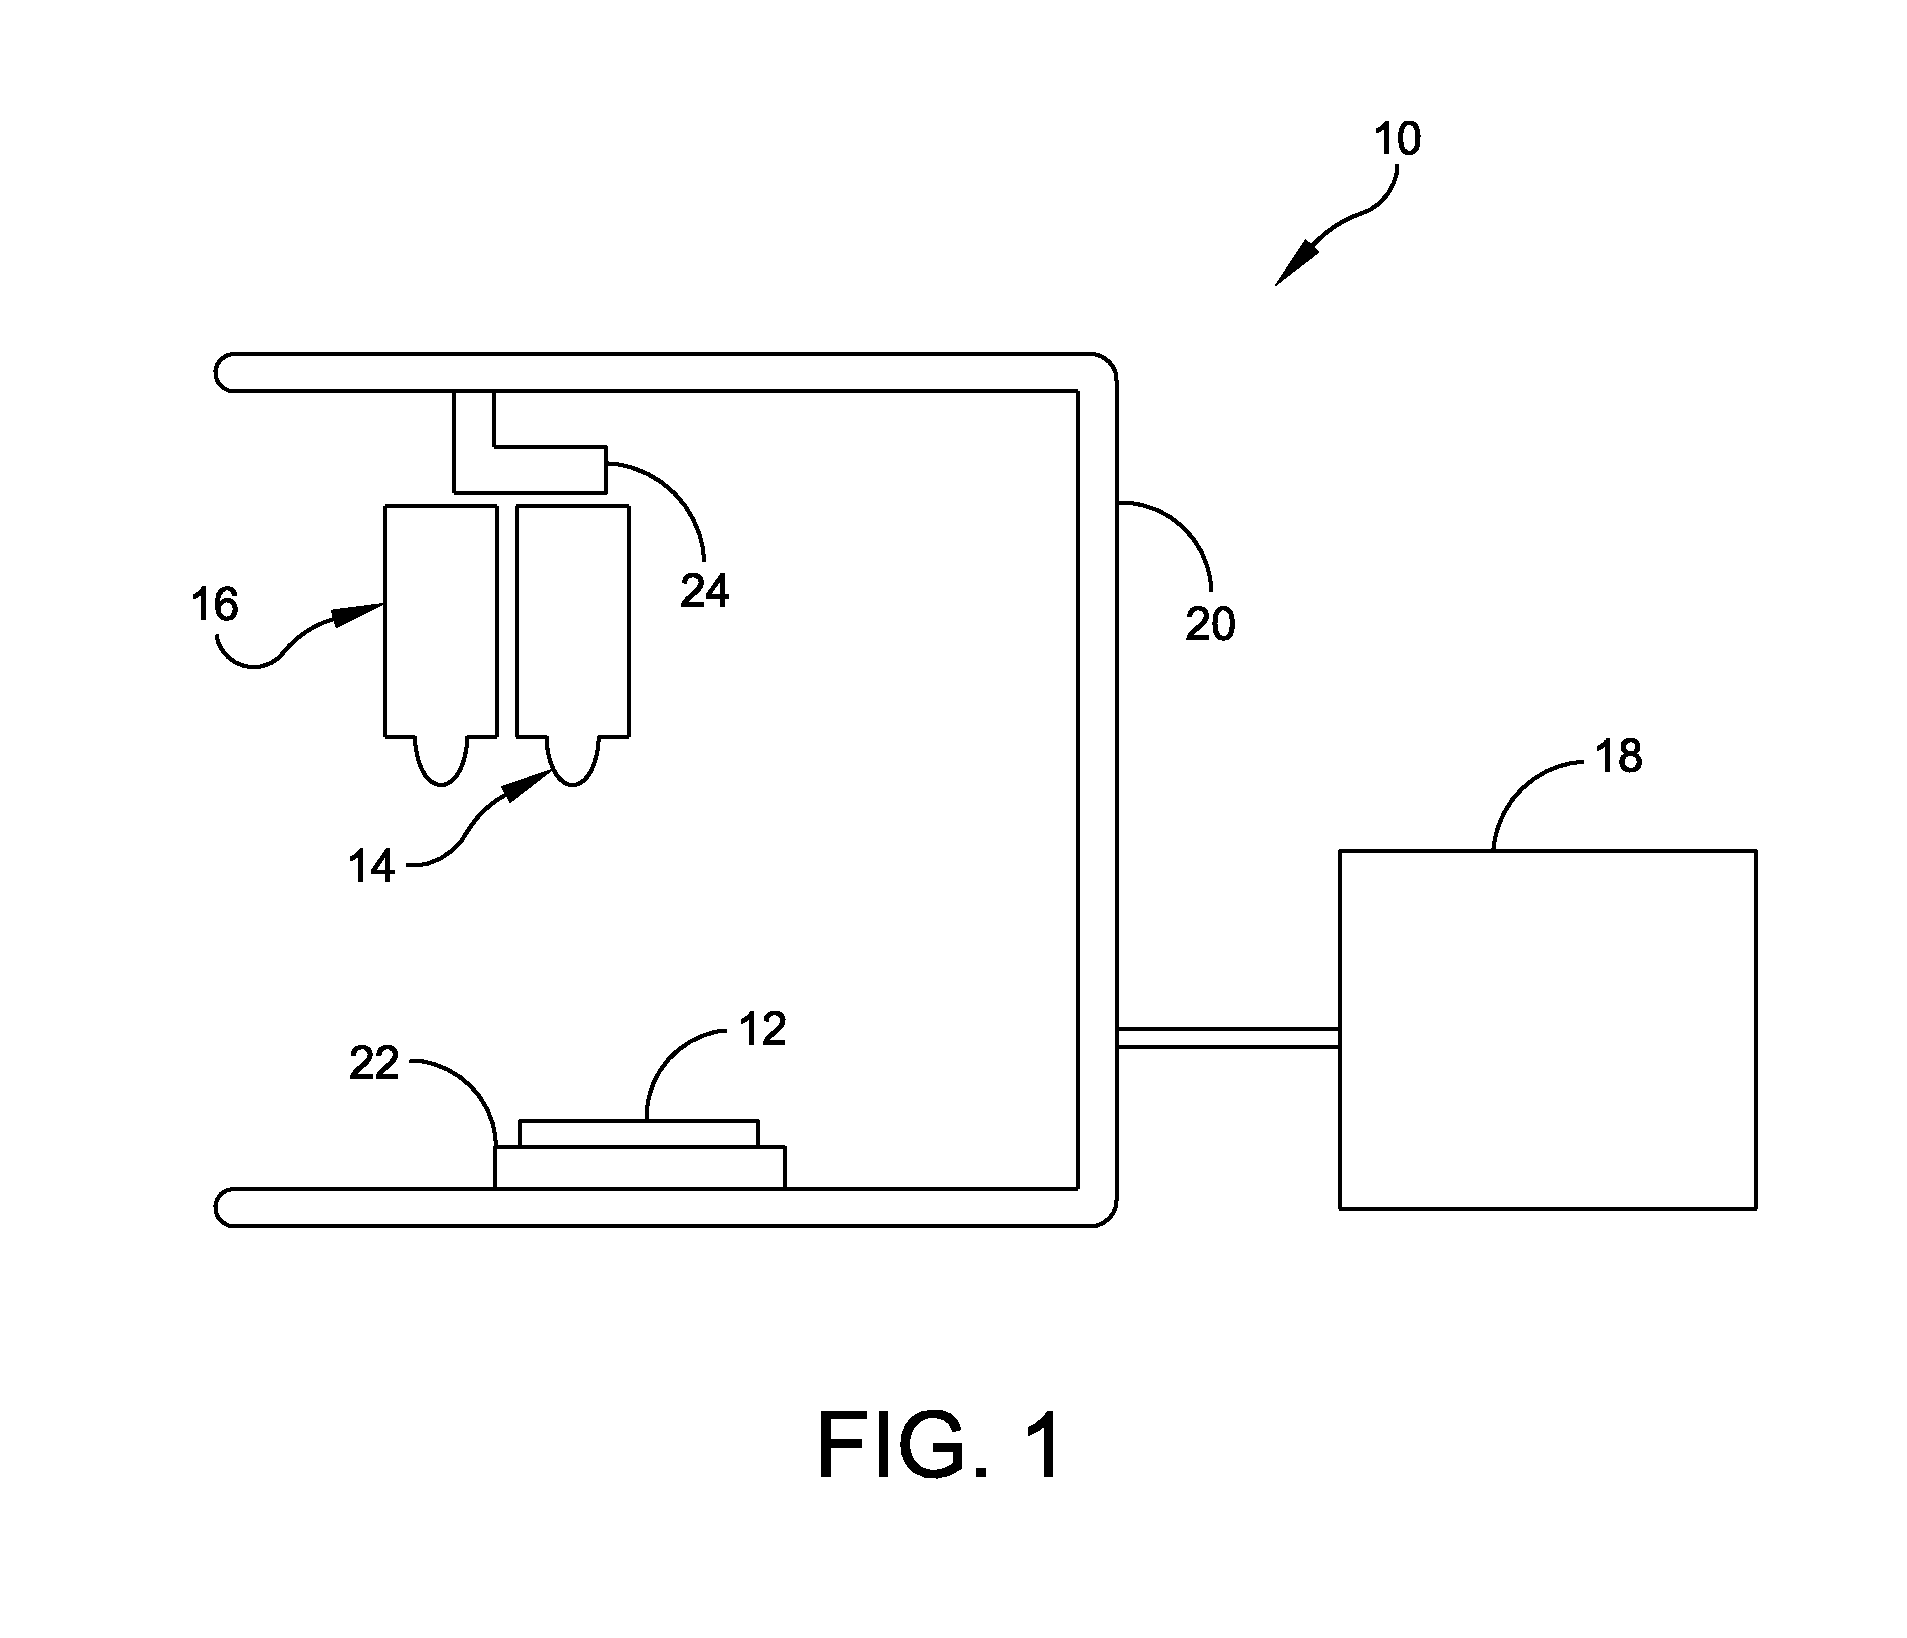 Method and apparatus for automatically adjusting dispensing units of a dispenser